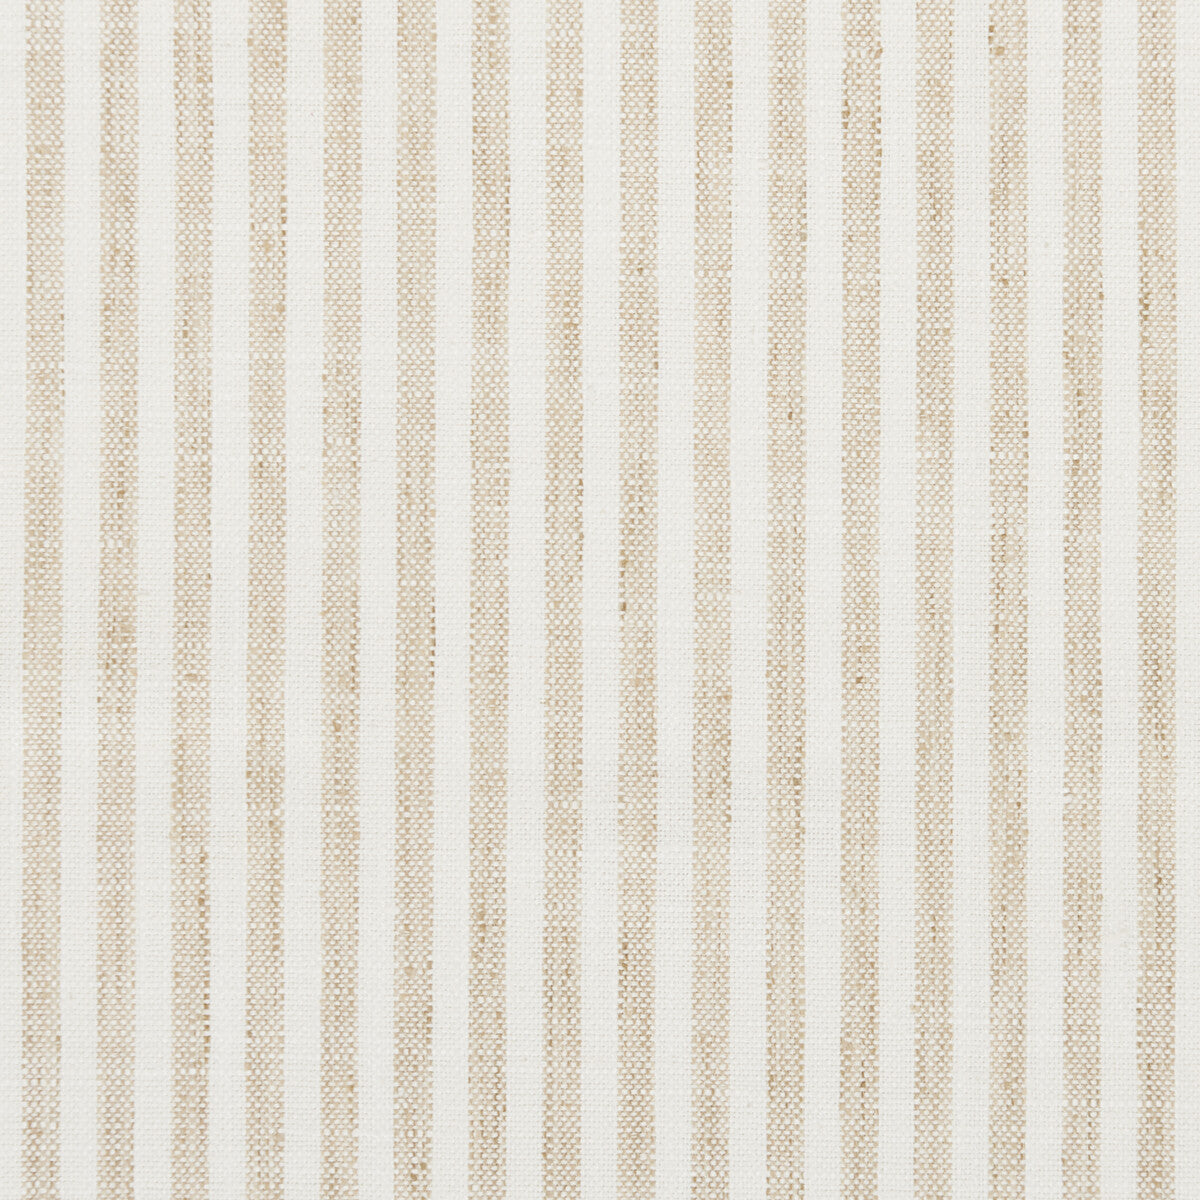 Kravet Basics fabric in 34080-161 color - pattern 34080.161.0 - by Kravet Basics in the Bungalow Chic II collection